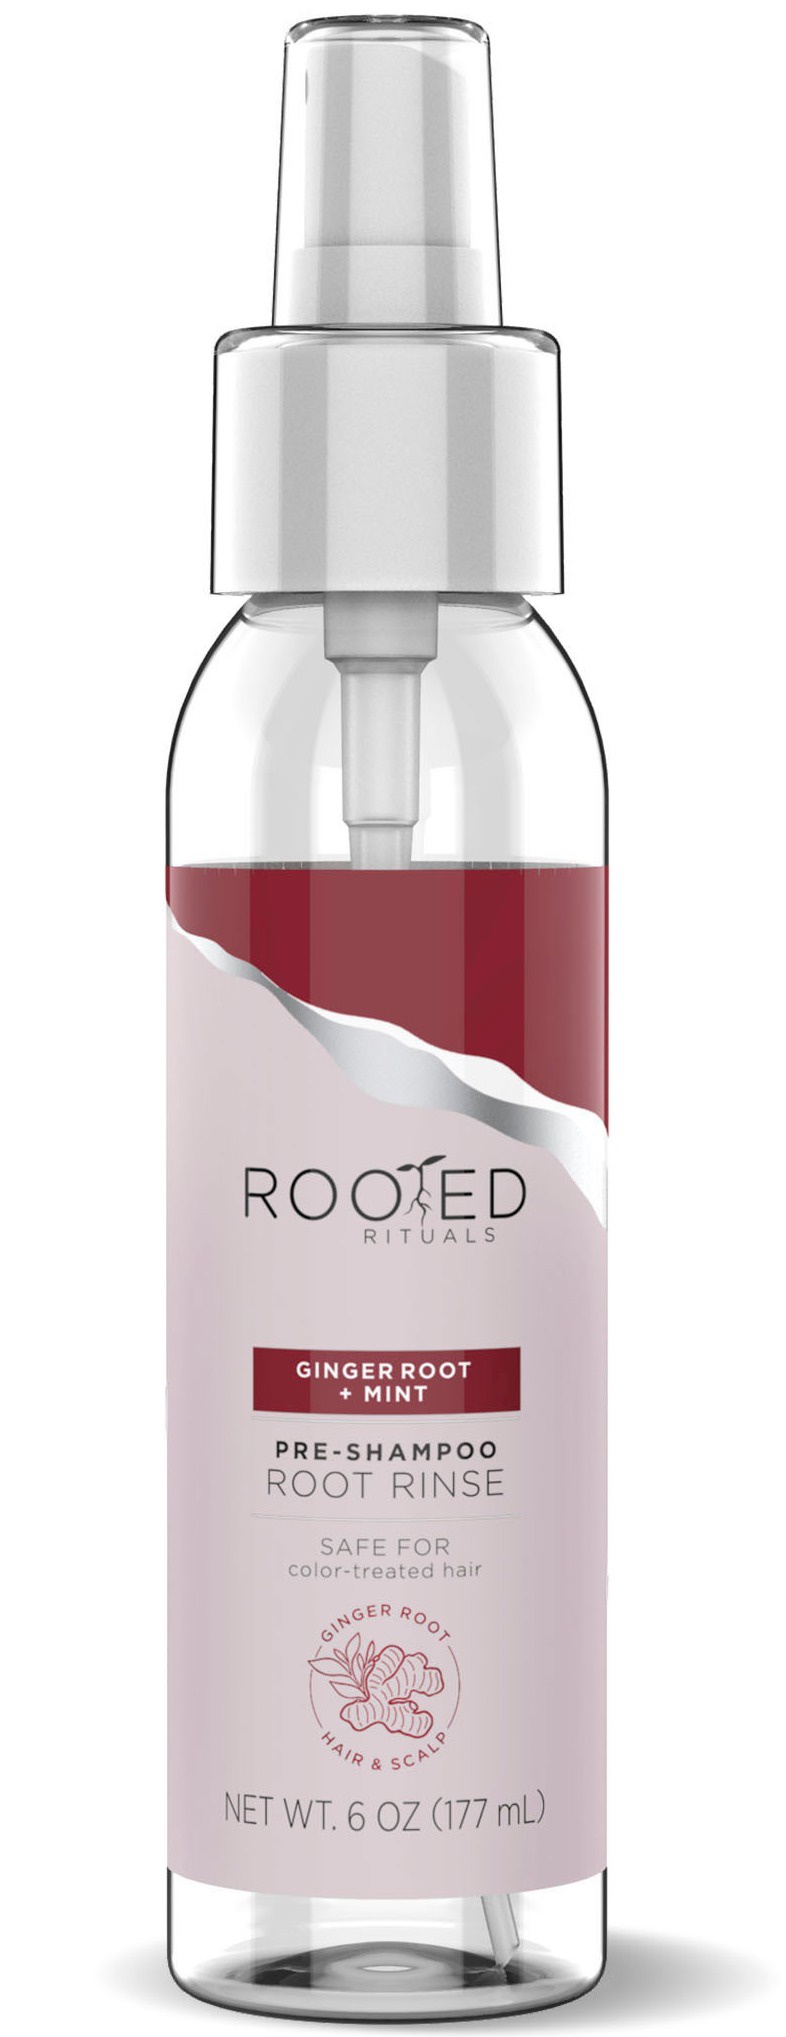 Rooted Rituals Ginger Root +mint Pre-shampoo Root Rinse